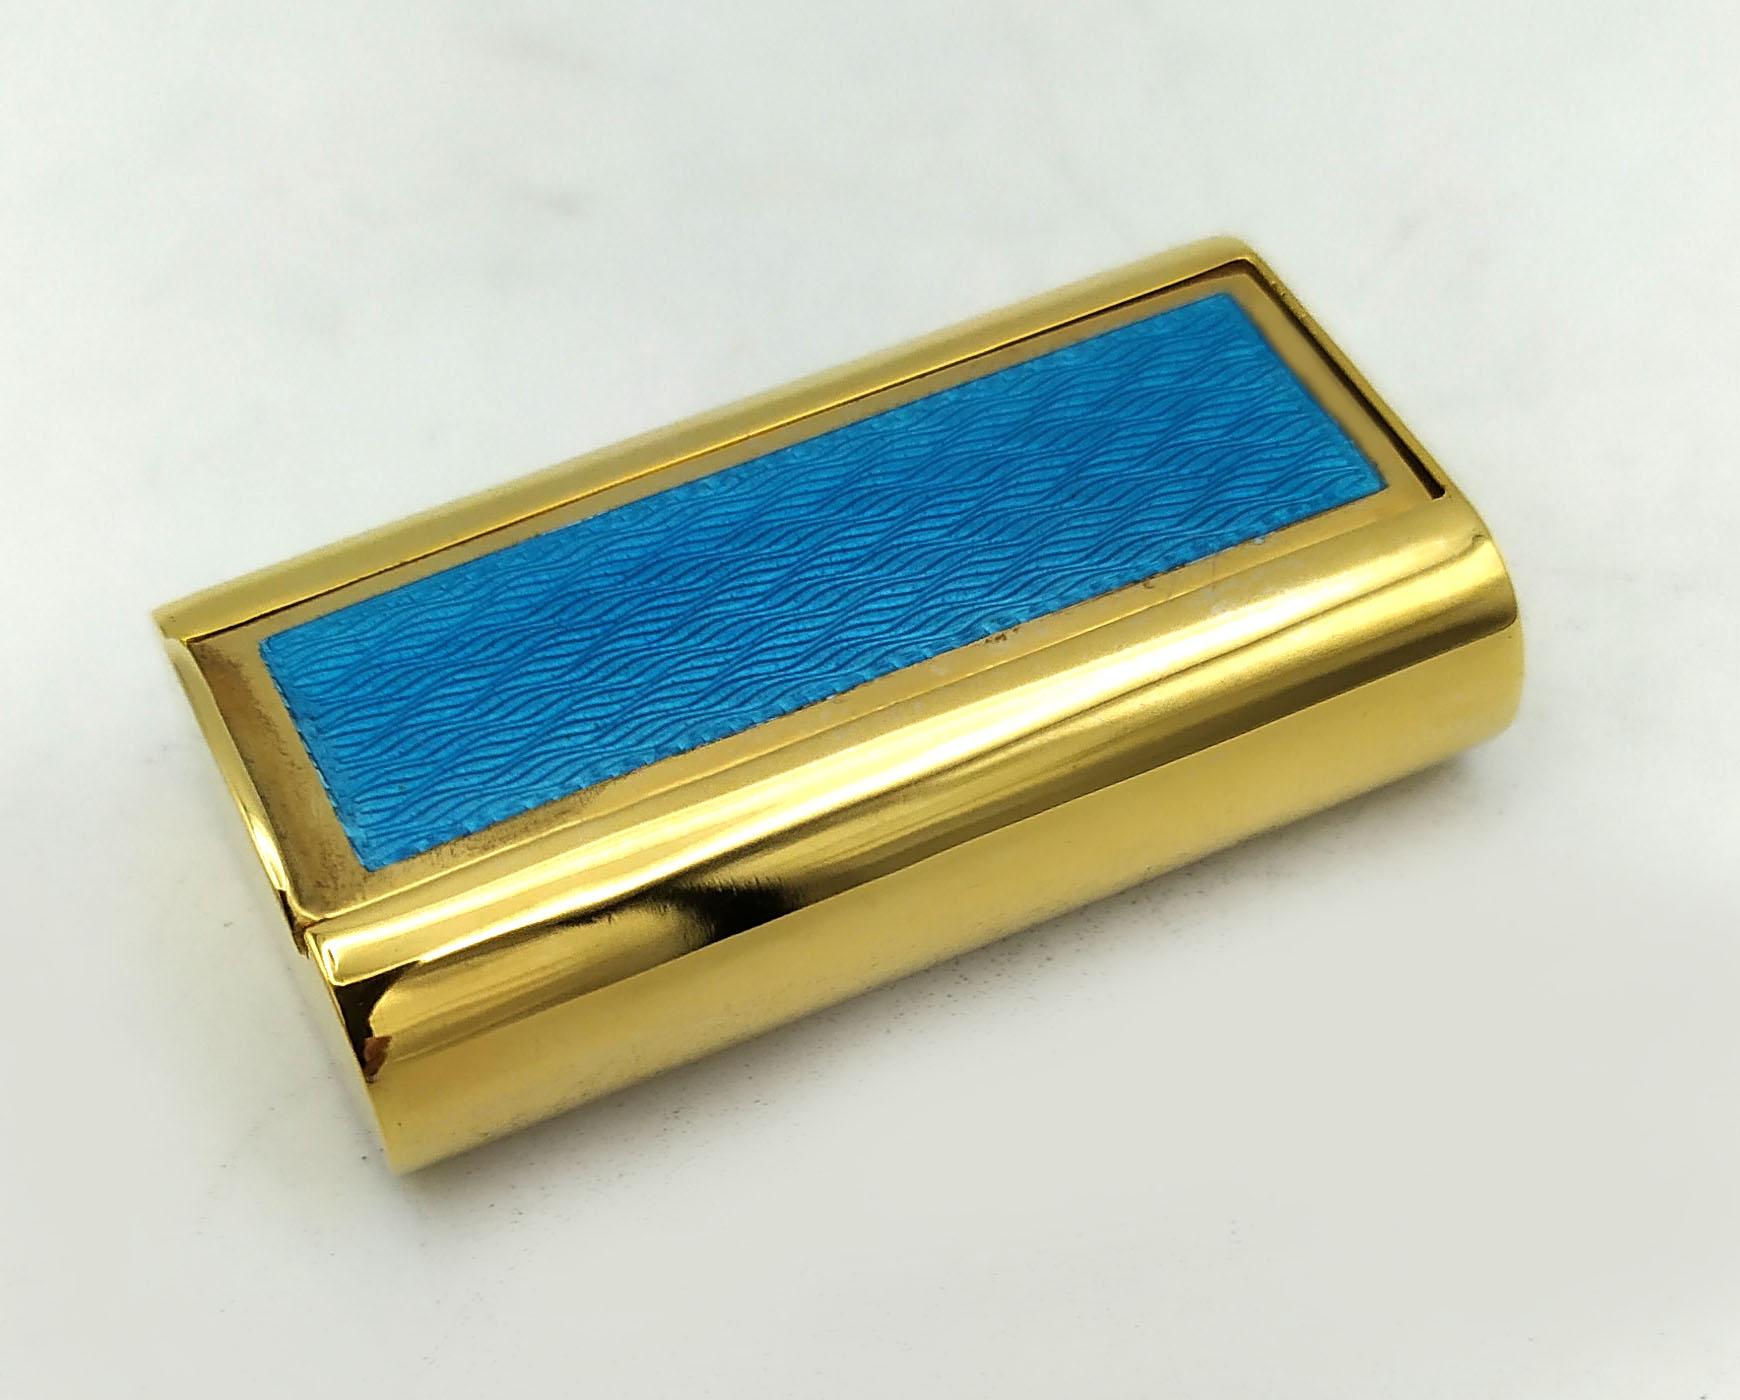 Pill Box Silver is in 925/1000 sterling silver gold plated 24carats.
Pill Box Silver has light blue translucent fired enamels on guilloché.
Pill Box Silver has a sliding lid and hole underneath, for sweetener or other pills.
Pill Box Silver Sterling